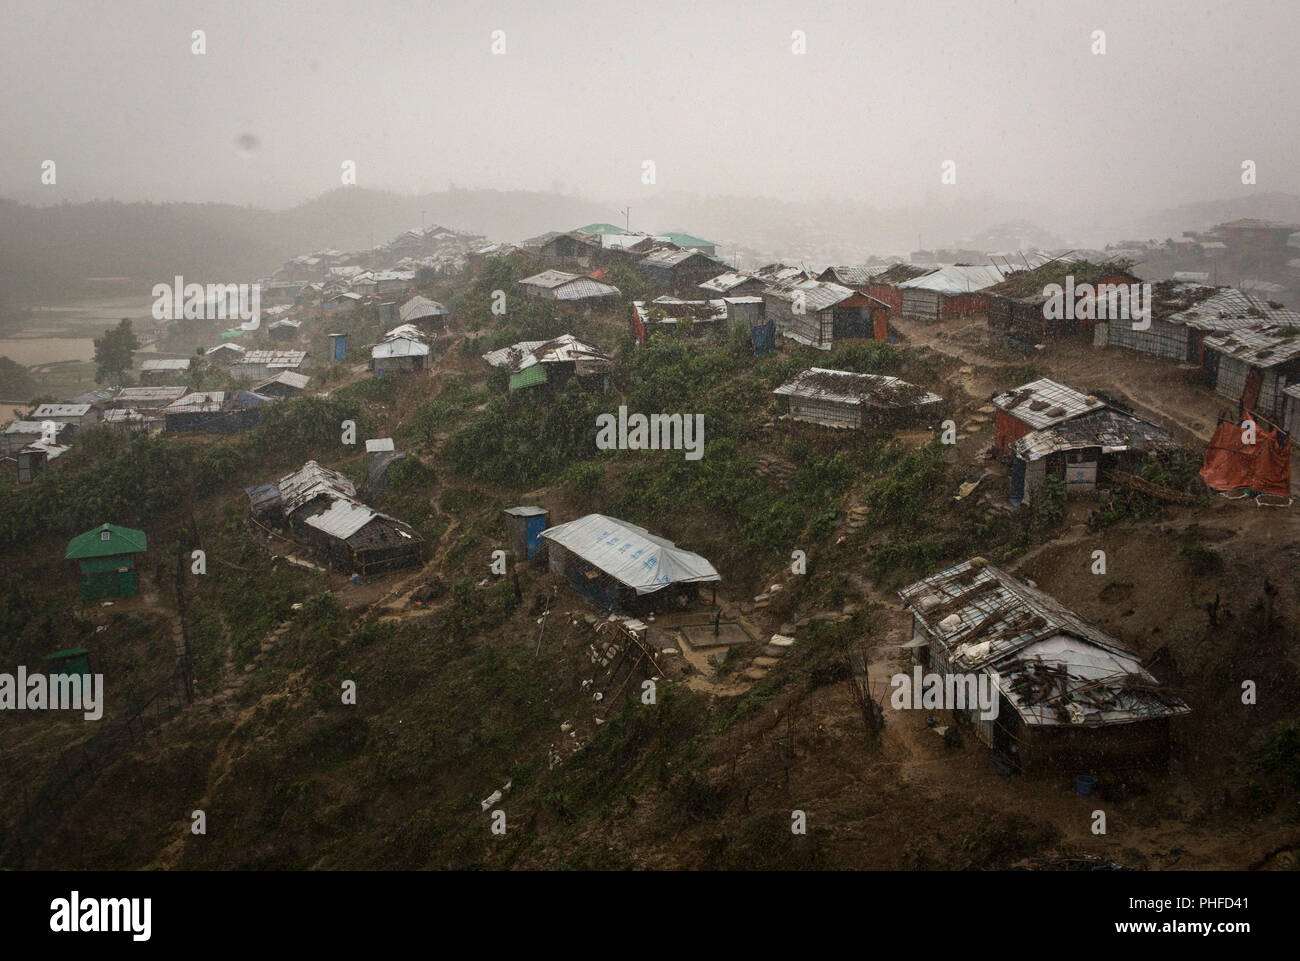 A part of Chakmakul, one of the camps sheltering over 800,000 Rohingya refugees is seen during a heavy downpour, Cox's Bazar, Bangladesh, July 4, 2018 Stock Photo